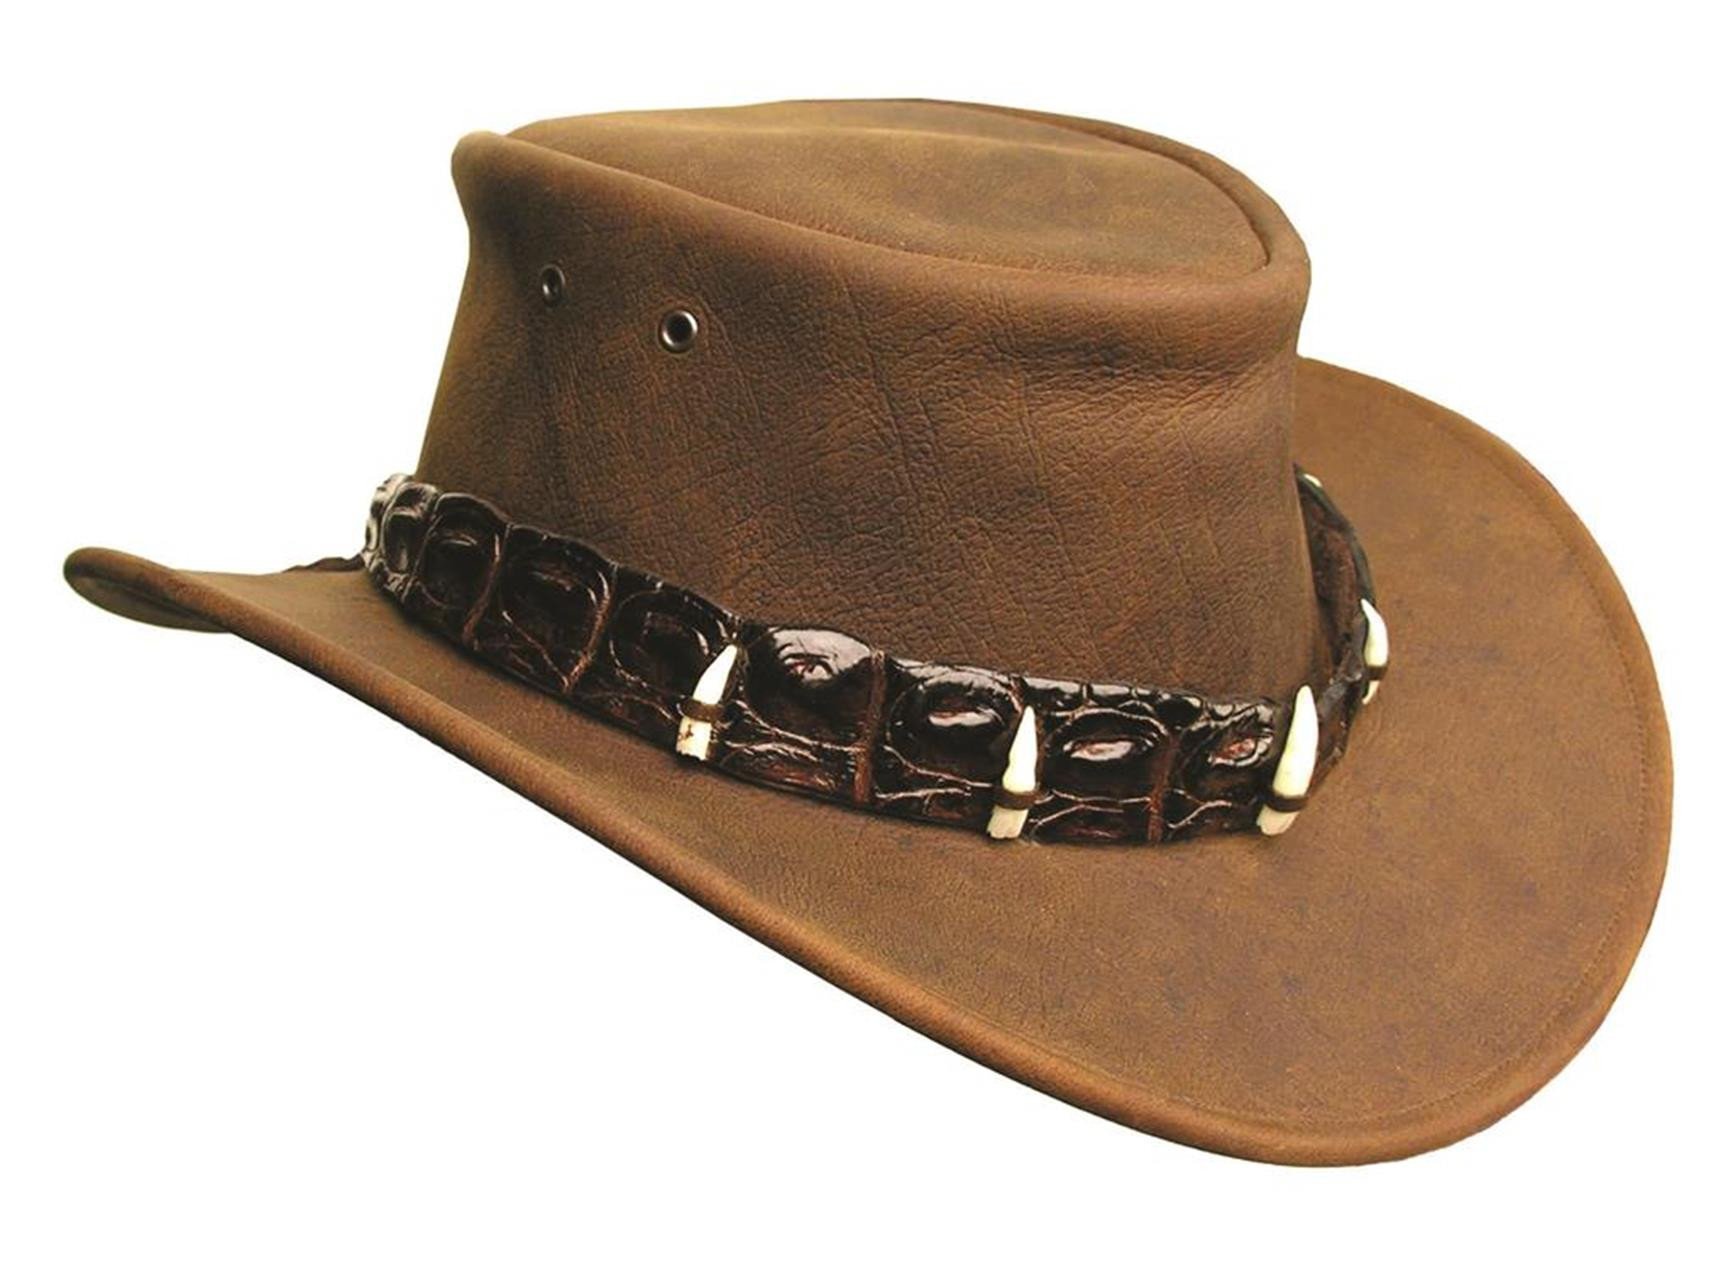 Dundee Leather Hat with Real Croc Theeth and Leather 2nd choice ...